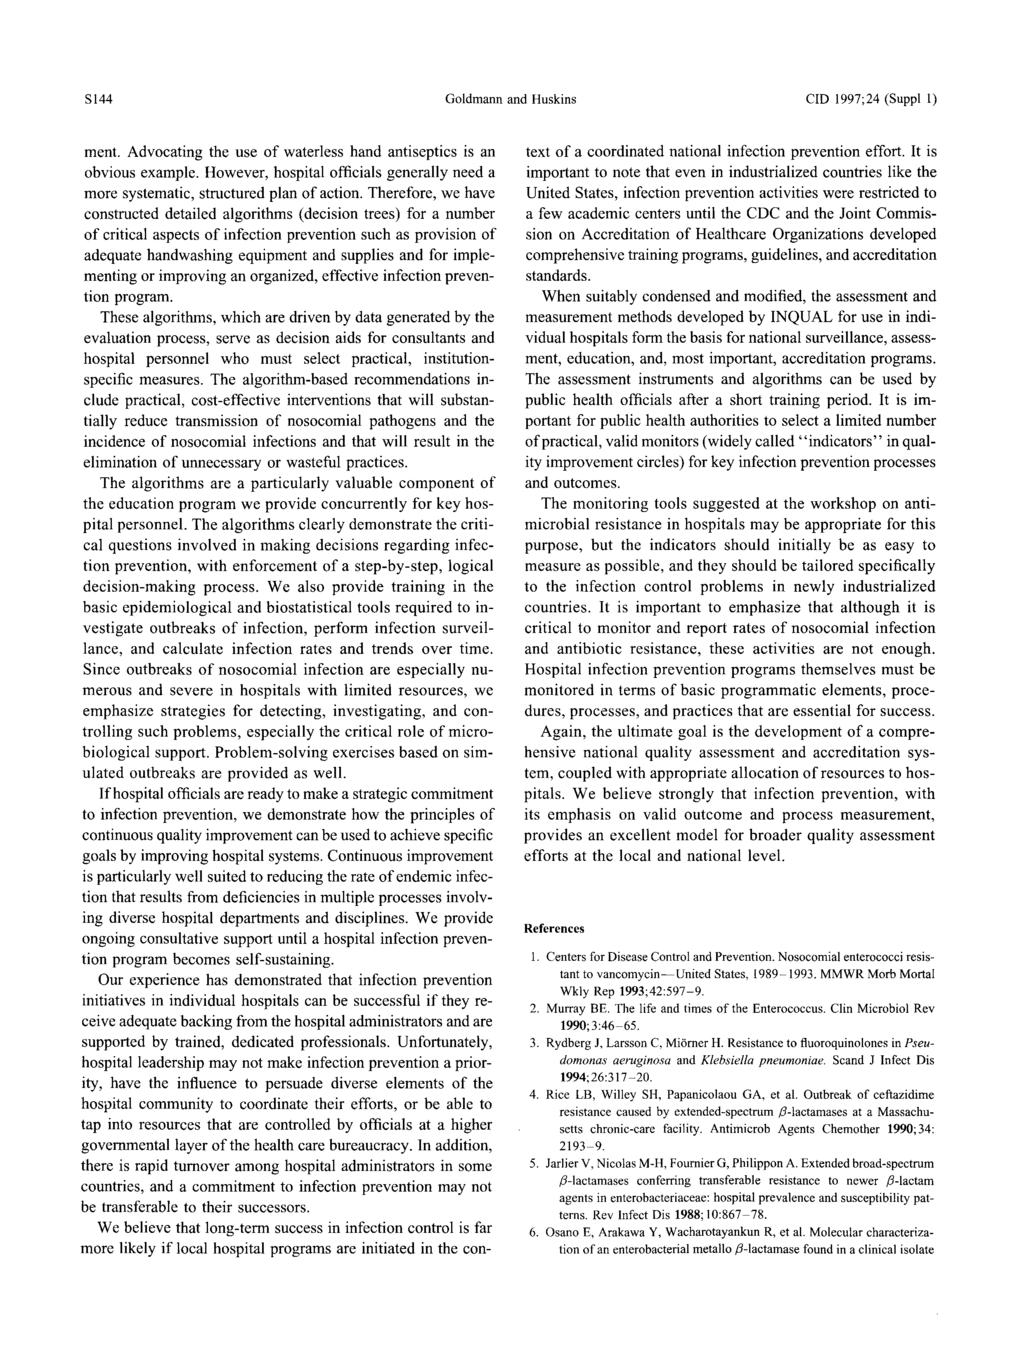 S144 Goldmann and Huskins CID 1997; 24 (Suppl 1) ment. Advocating the use of waterless hand antiseptics is an obvious example.